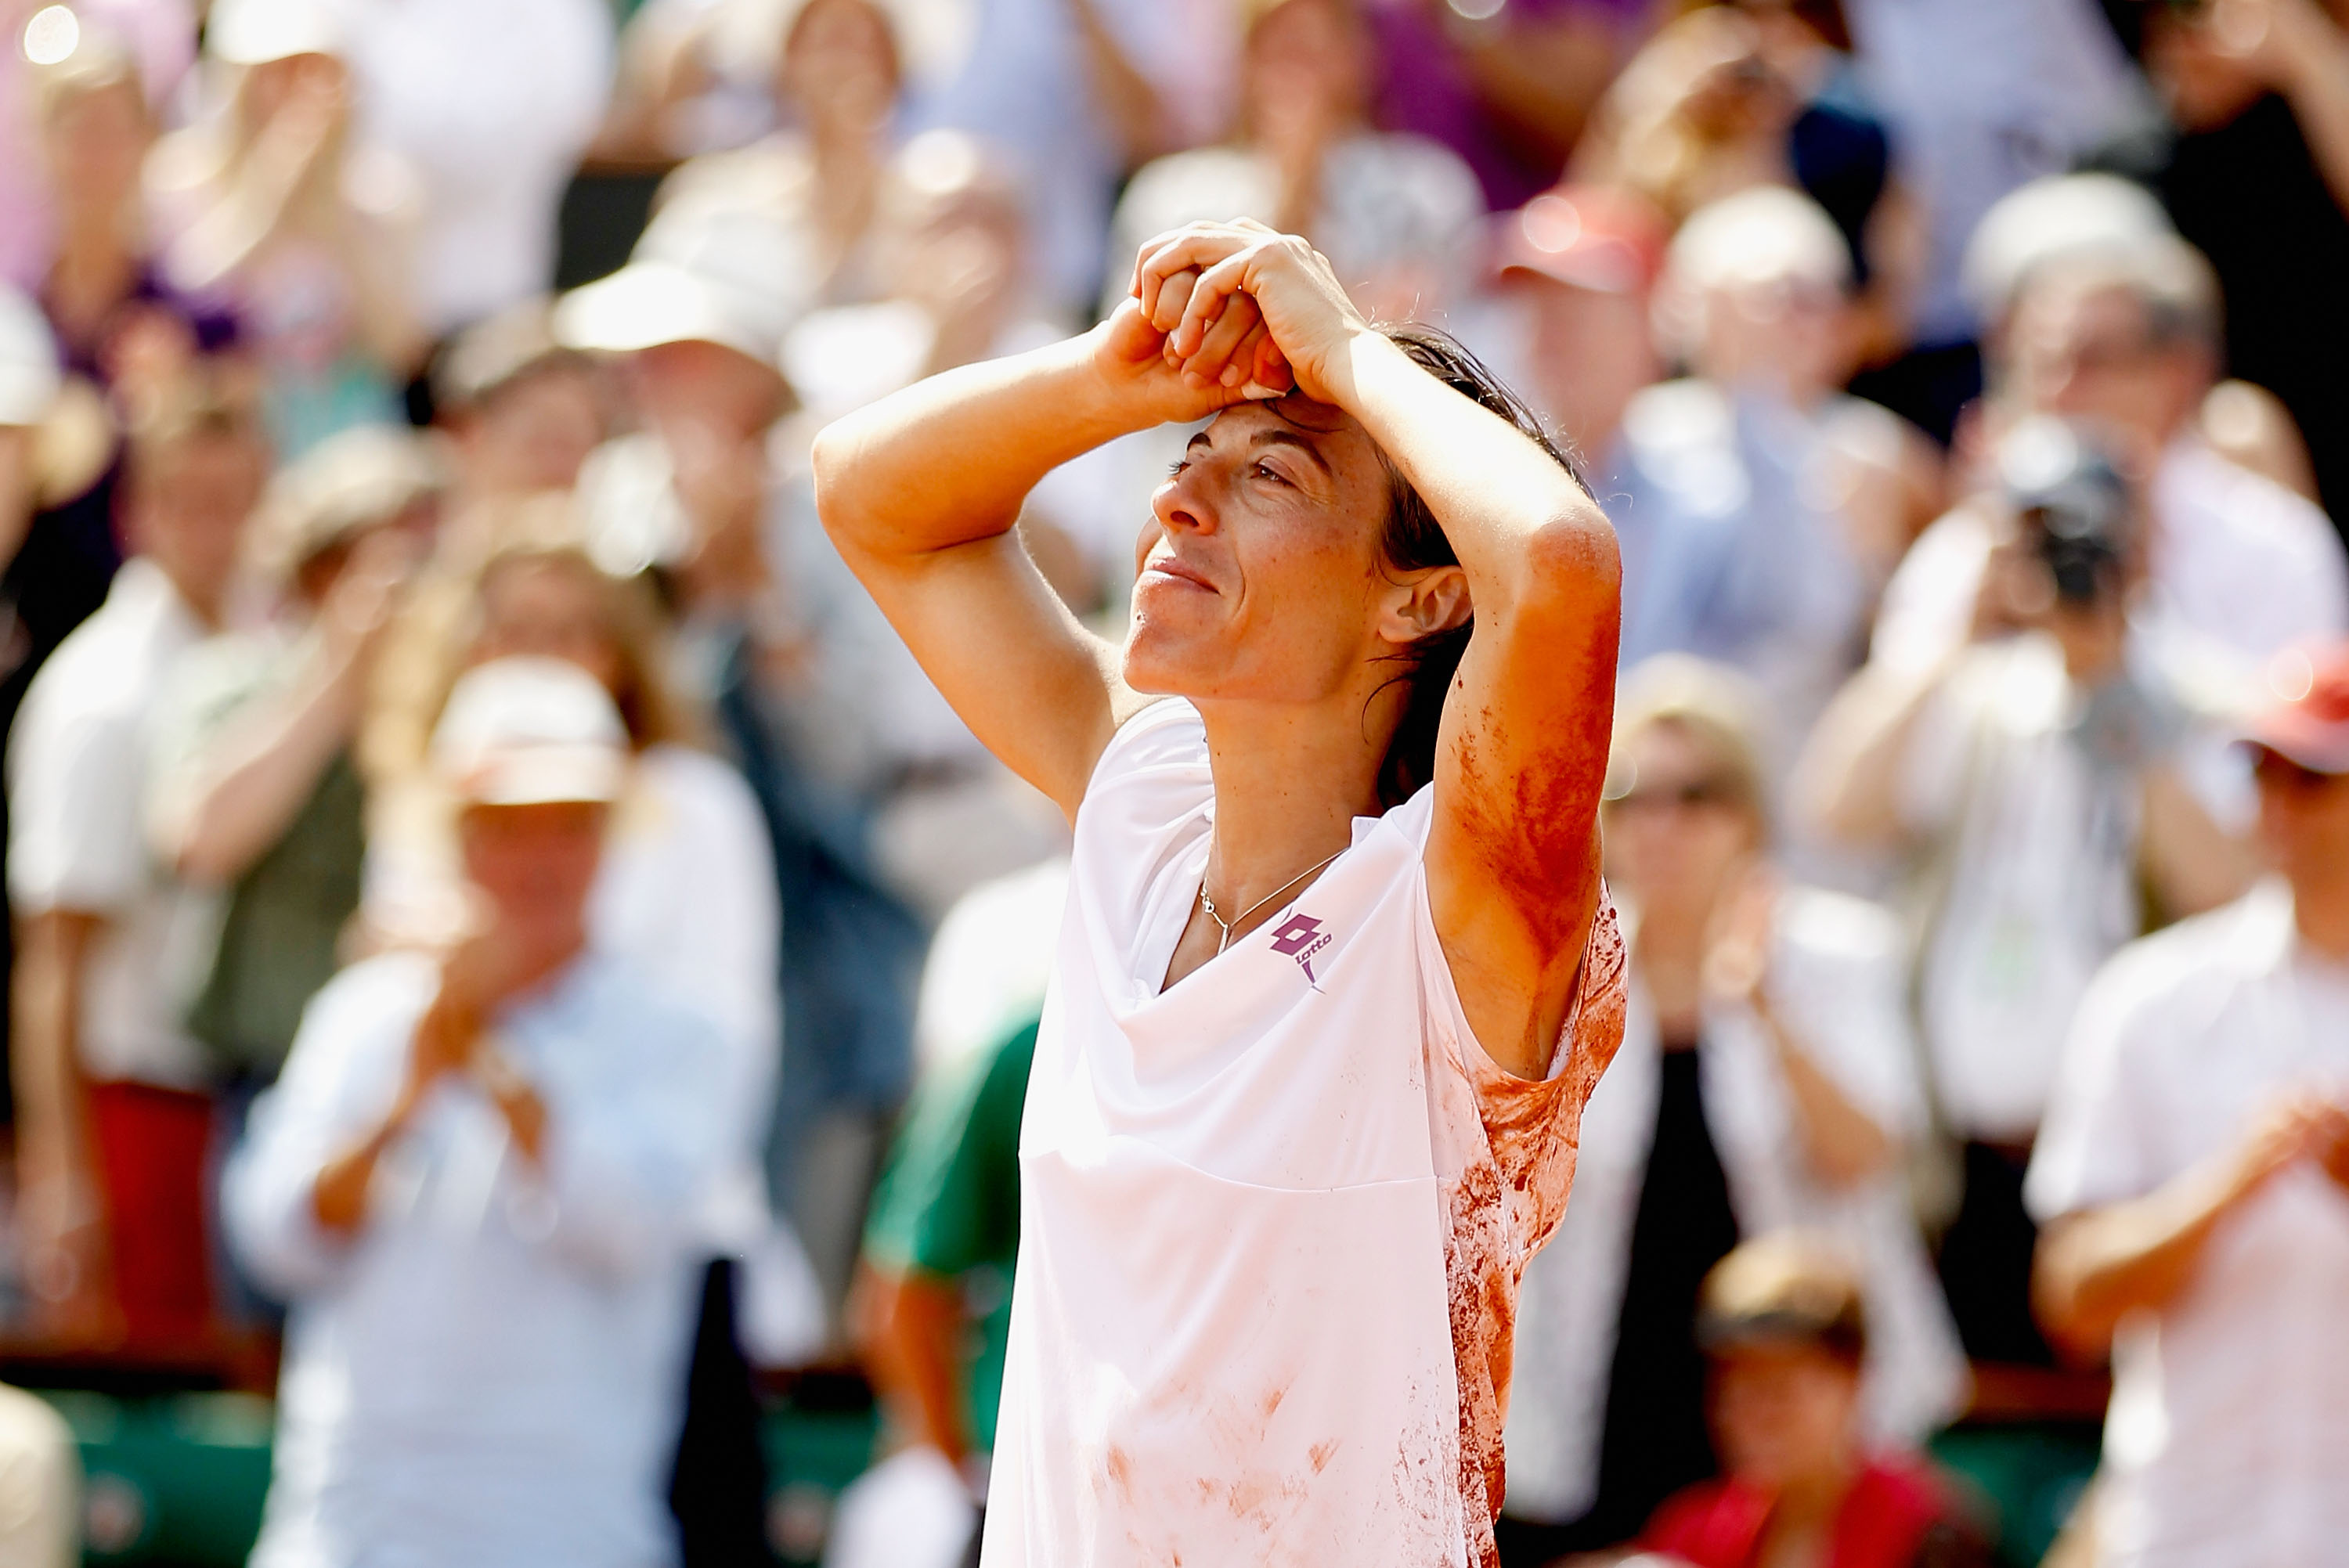 PARIS - JUNE 05:  Francesca Schiavone of Italy celebrates winning championship point during women's singles final match between Francesca Schiavone of Italy and Samantha Stosur of Australia on day fourteen of the French Open at Roland Garros on June 5, 20